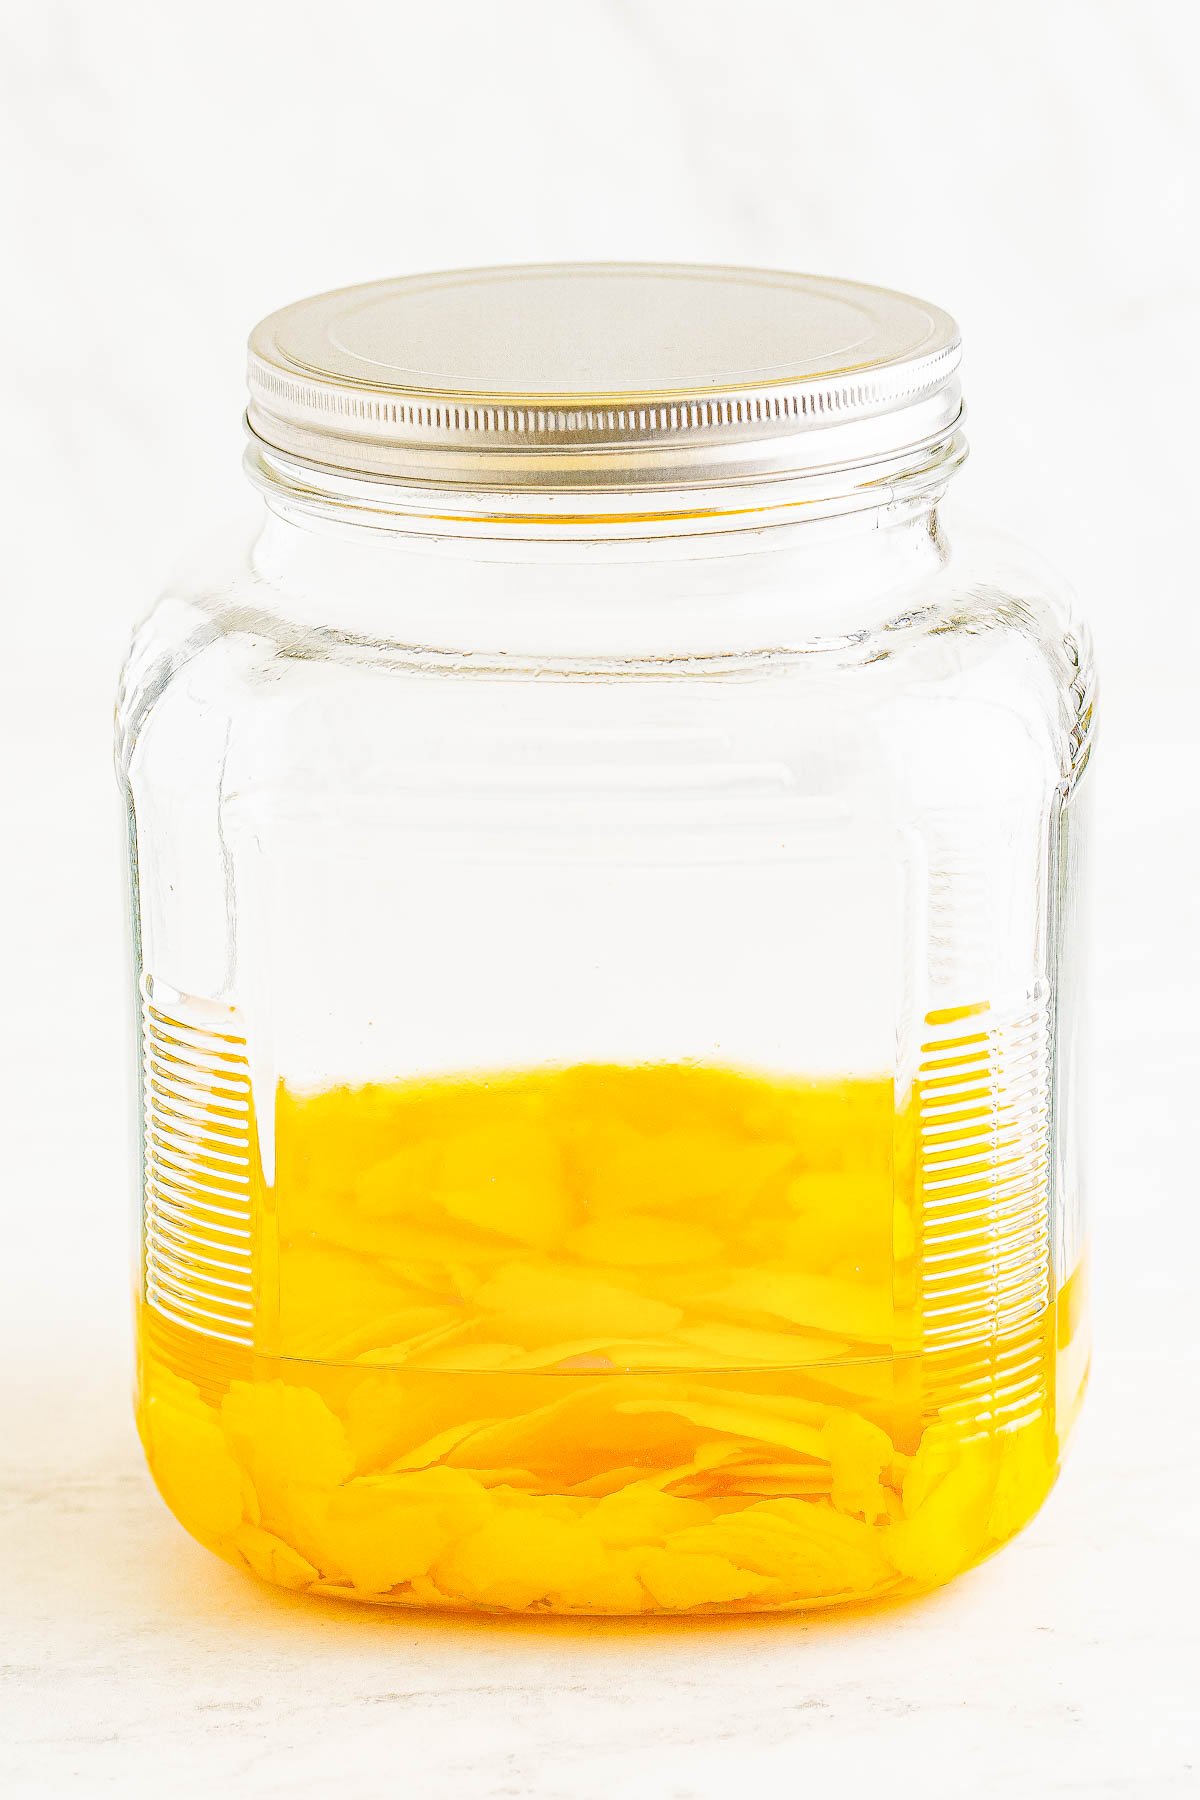 A glass jar with Everclear and lemon peels against a white background.